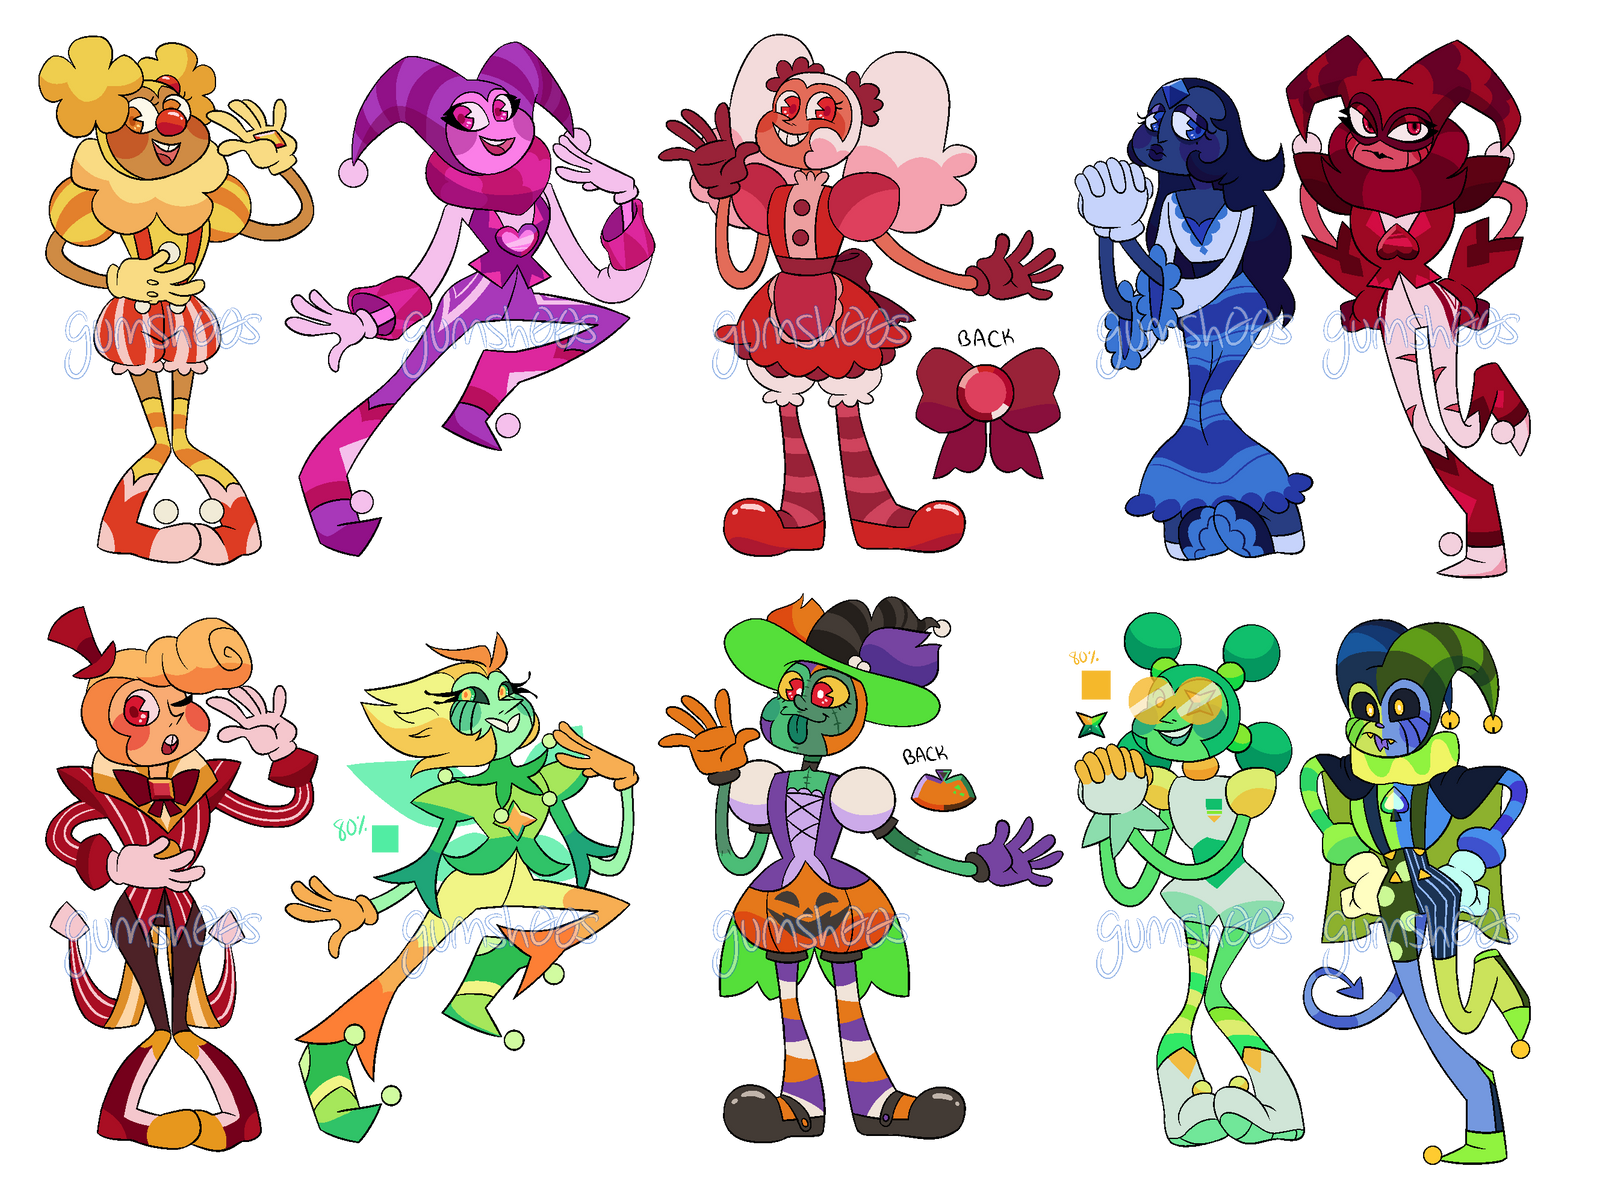 [REDUCED PRICE] [OPEN 2/10] SPINEL ADOPTS by Gumsh00s on DeviantArt